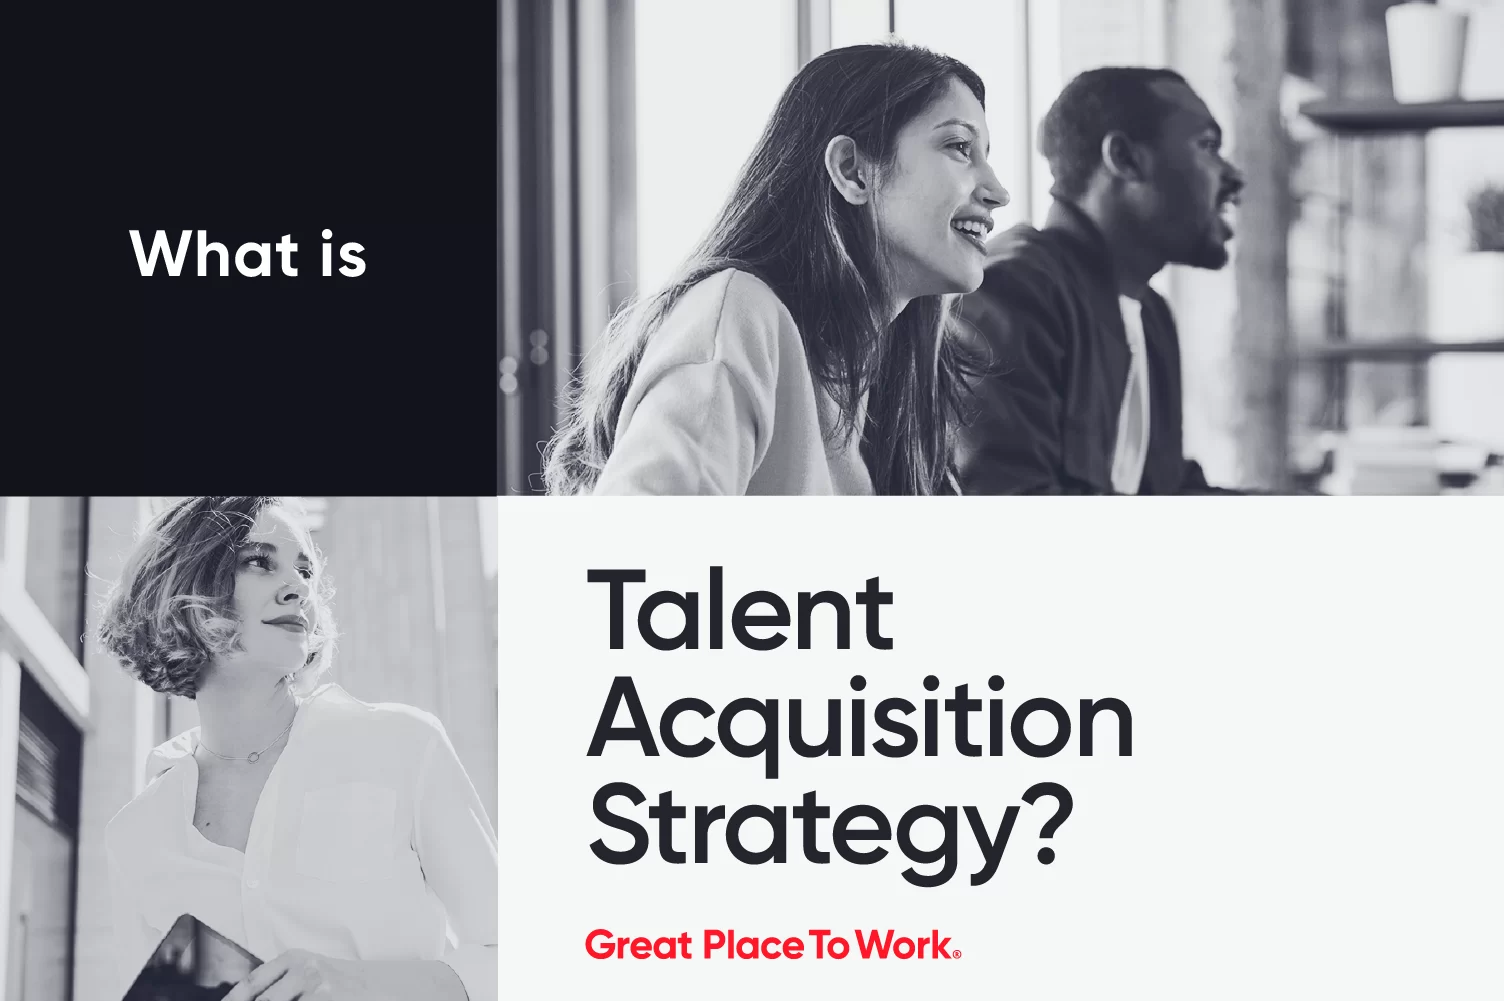 What is talent acquisition strategy